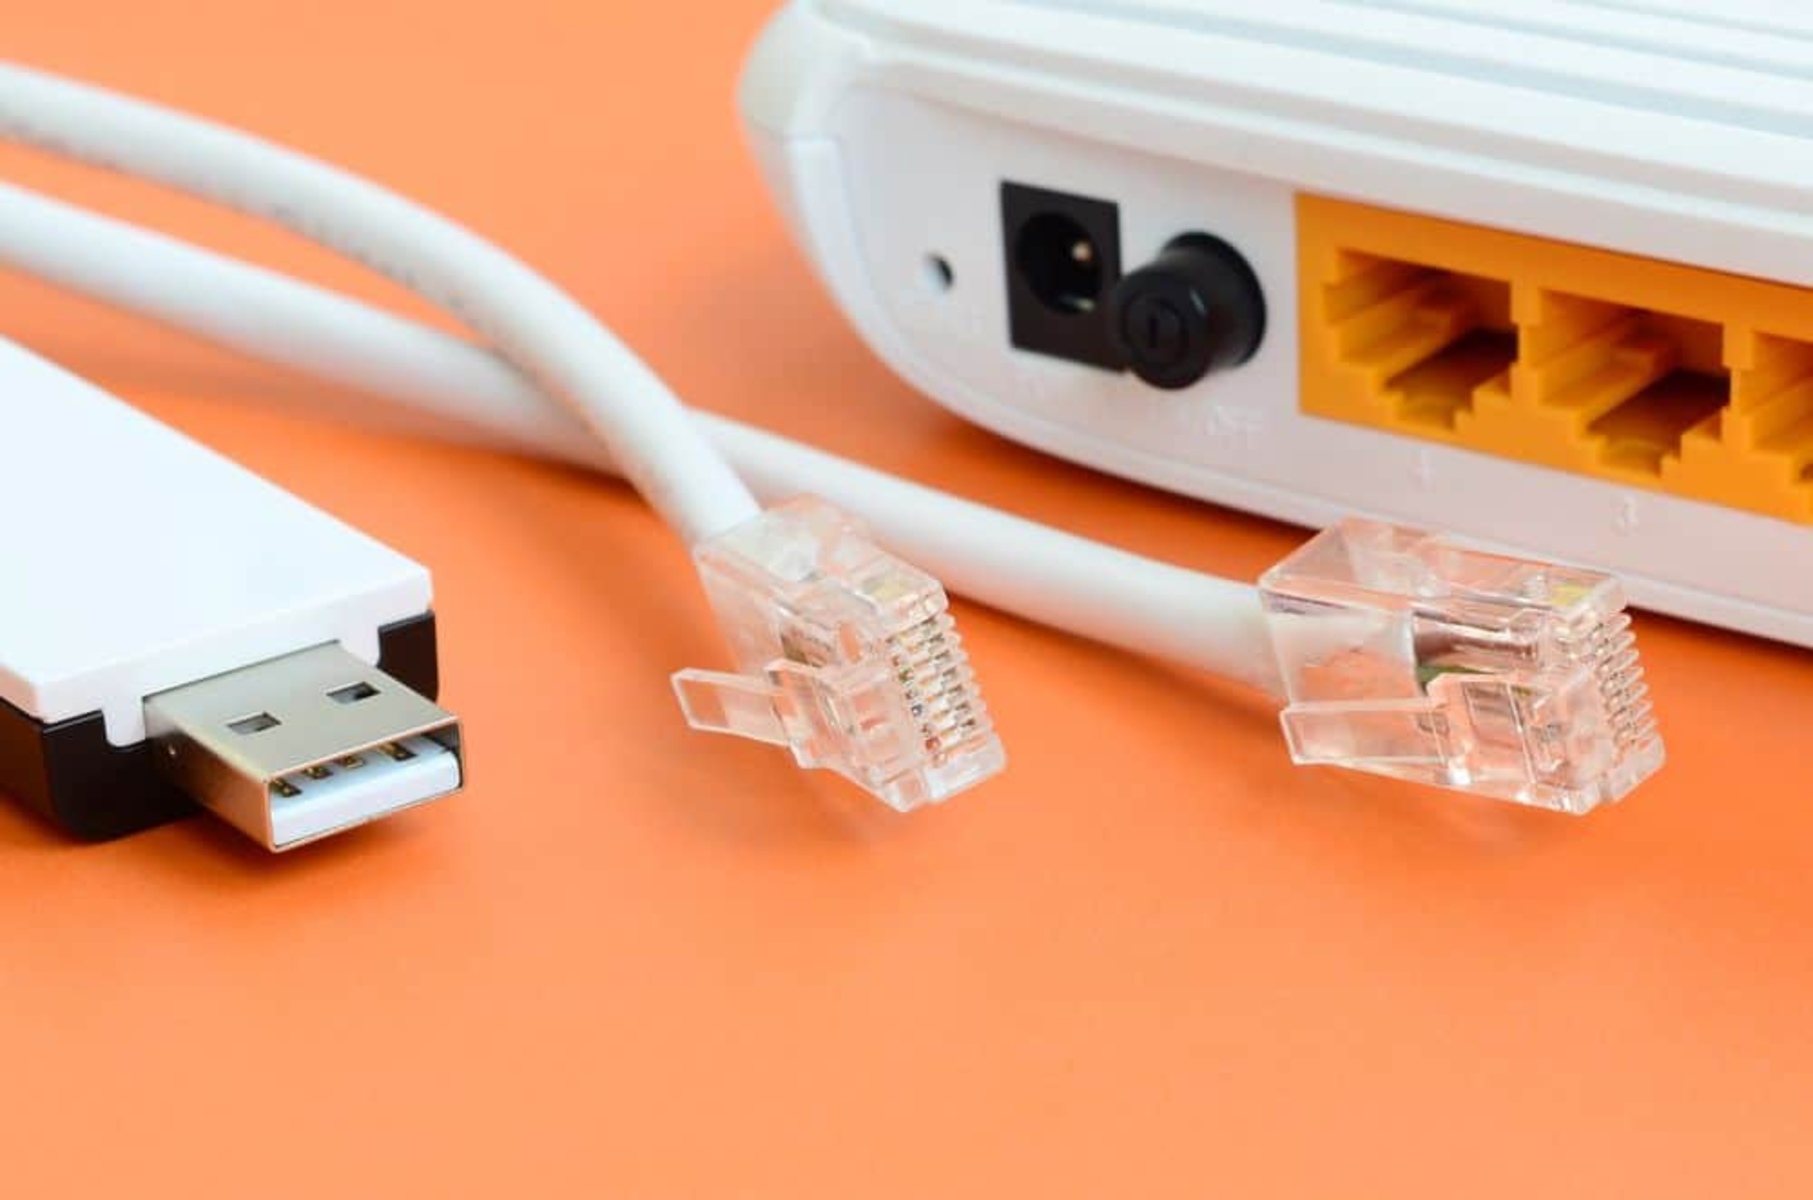 How To Add More Ethernet Ports To A Wireless Router